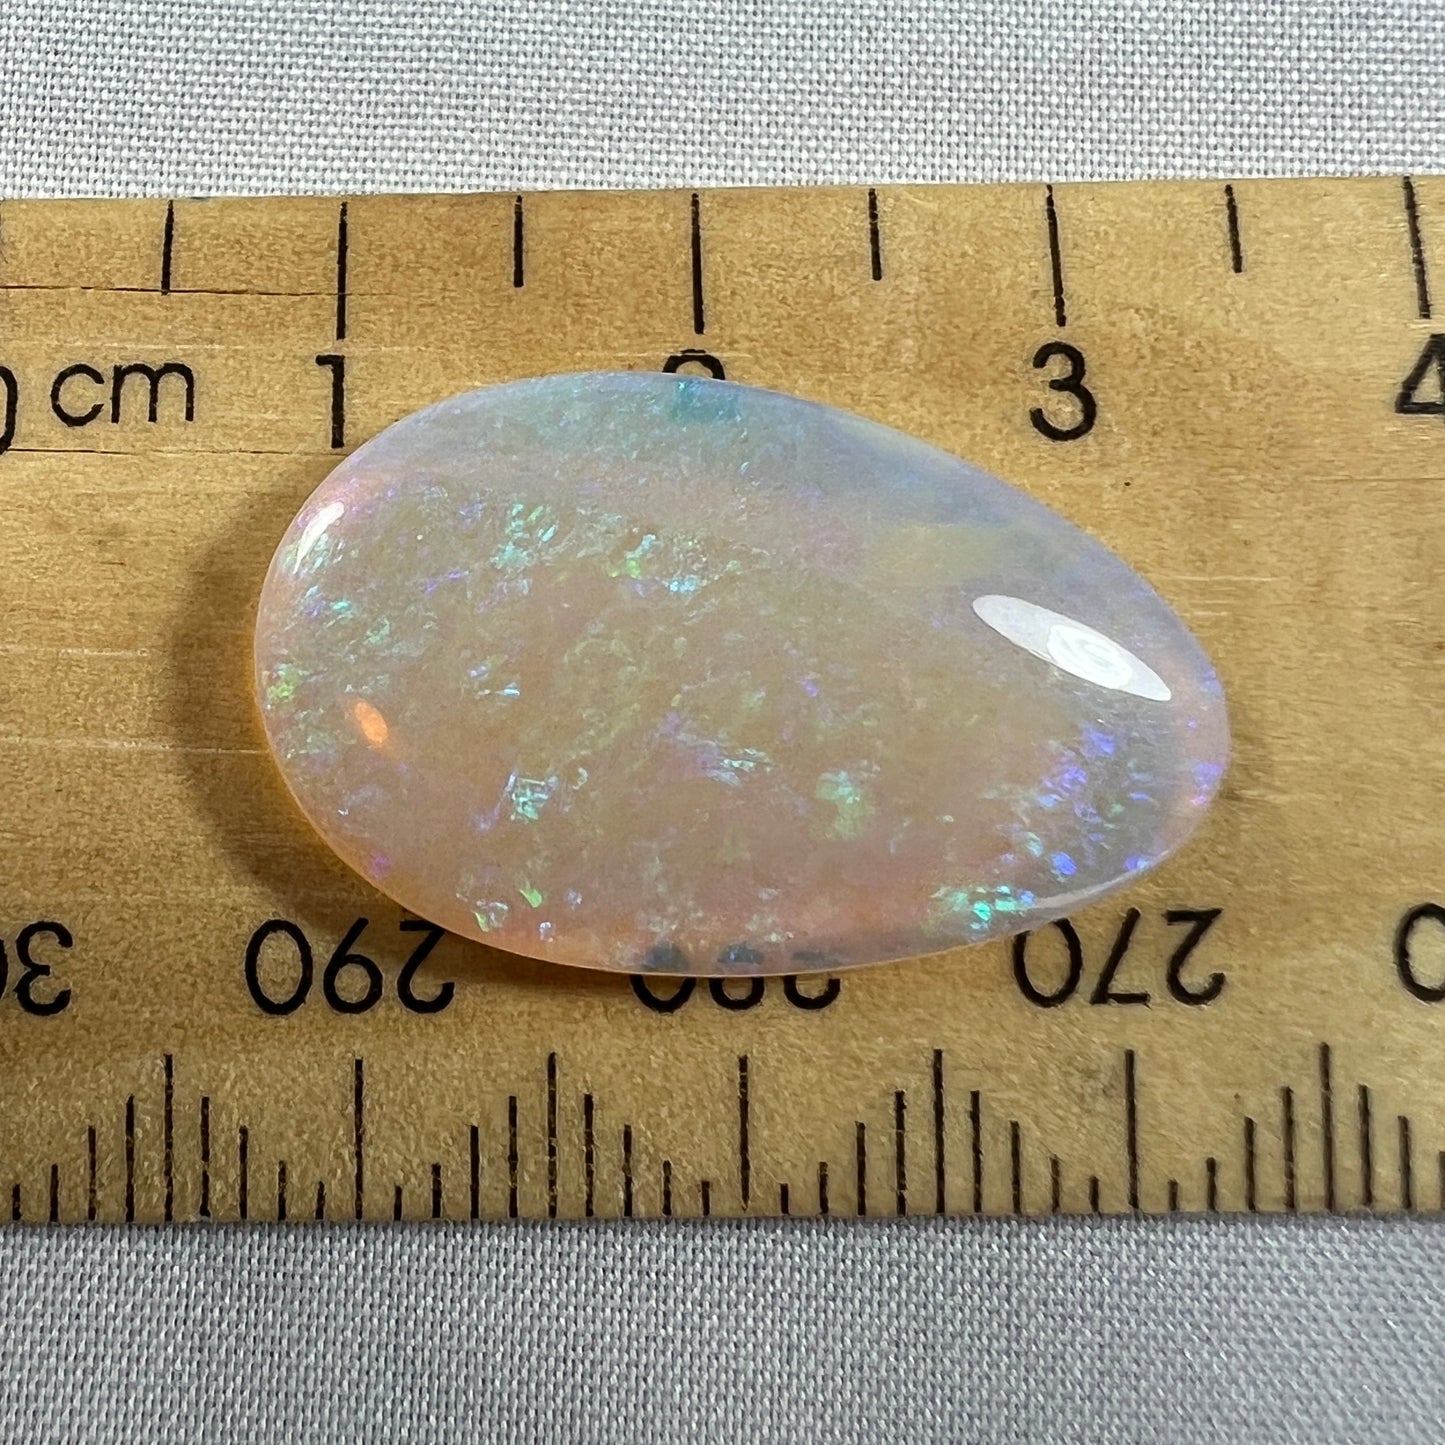 You will not find a better Lightning Ridge crystal opal than this one. Expertly cut and polished by Bill Johnston. Ready to go. 